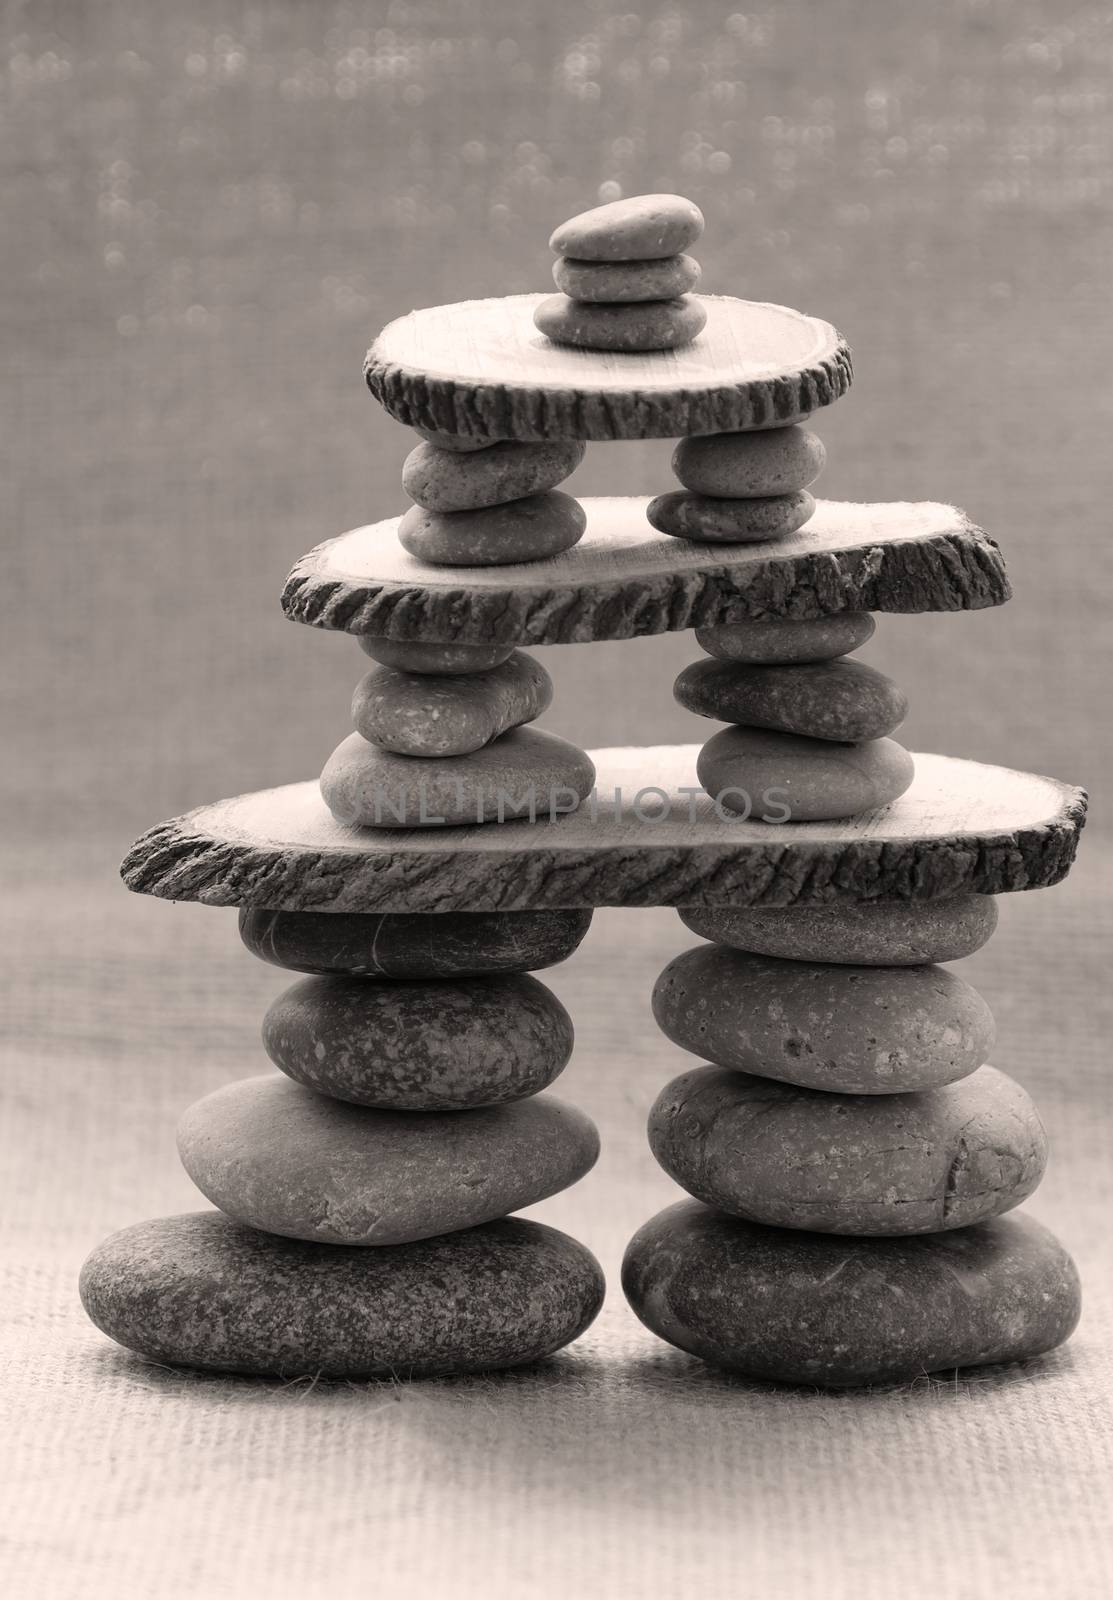 Amazing arrangement to make tower from pebble, two stack of stones and more boulder to illustration for bond in family relationship or burden of debt